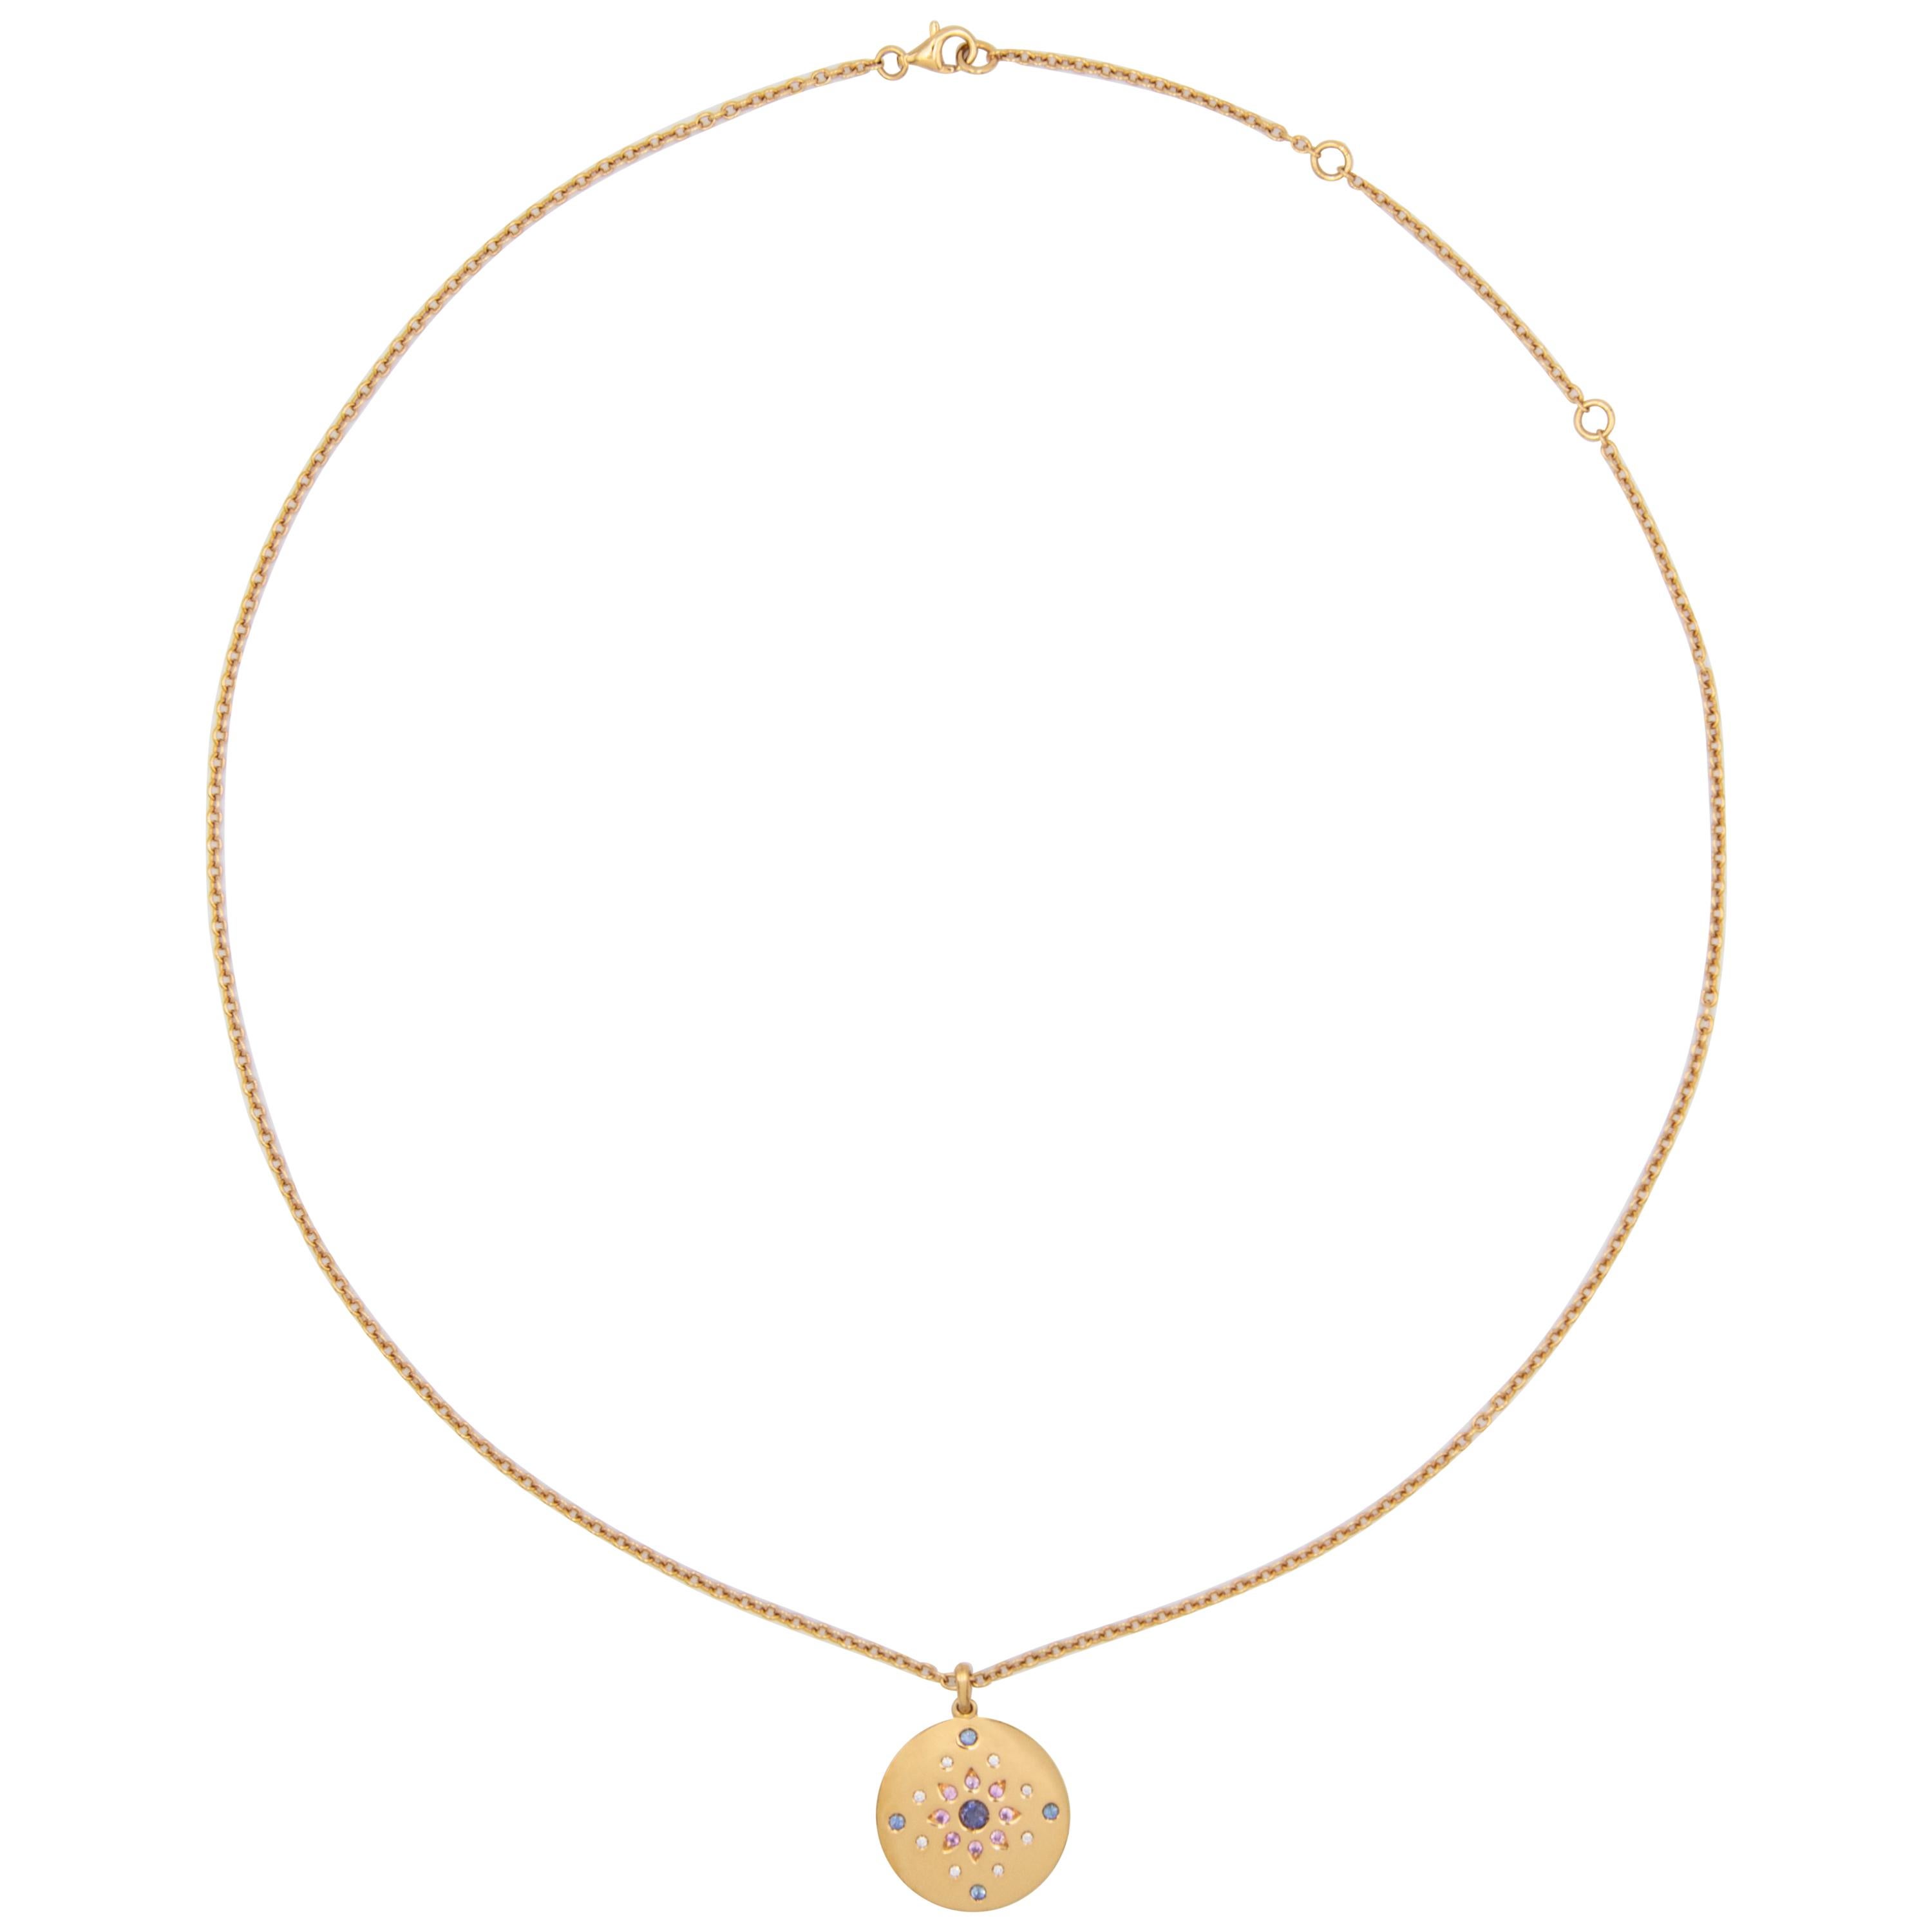 18 karat yellow gold necklace with round disc pendant and adjustable long chain. The pendant is set with 21 gemstones including a central emerald and diamonds. 

Please note that the necklace described corresponds to the first picture of this